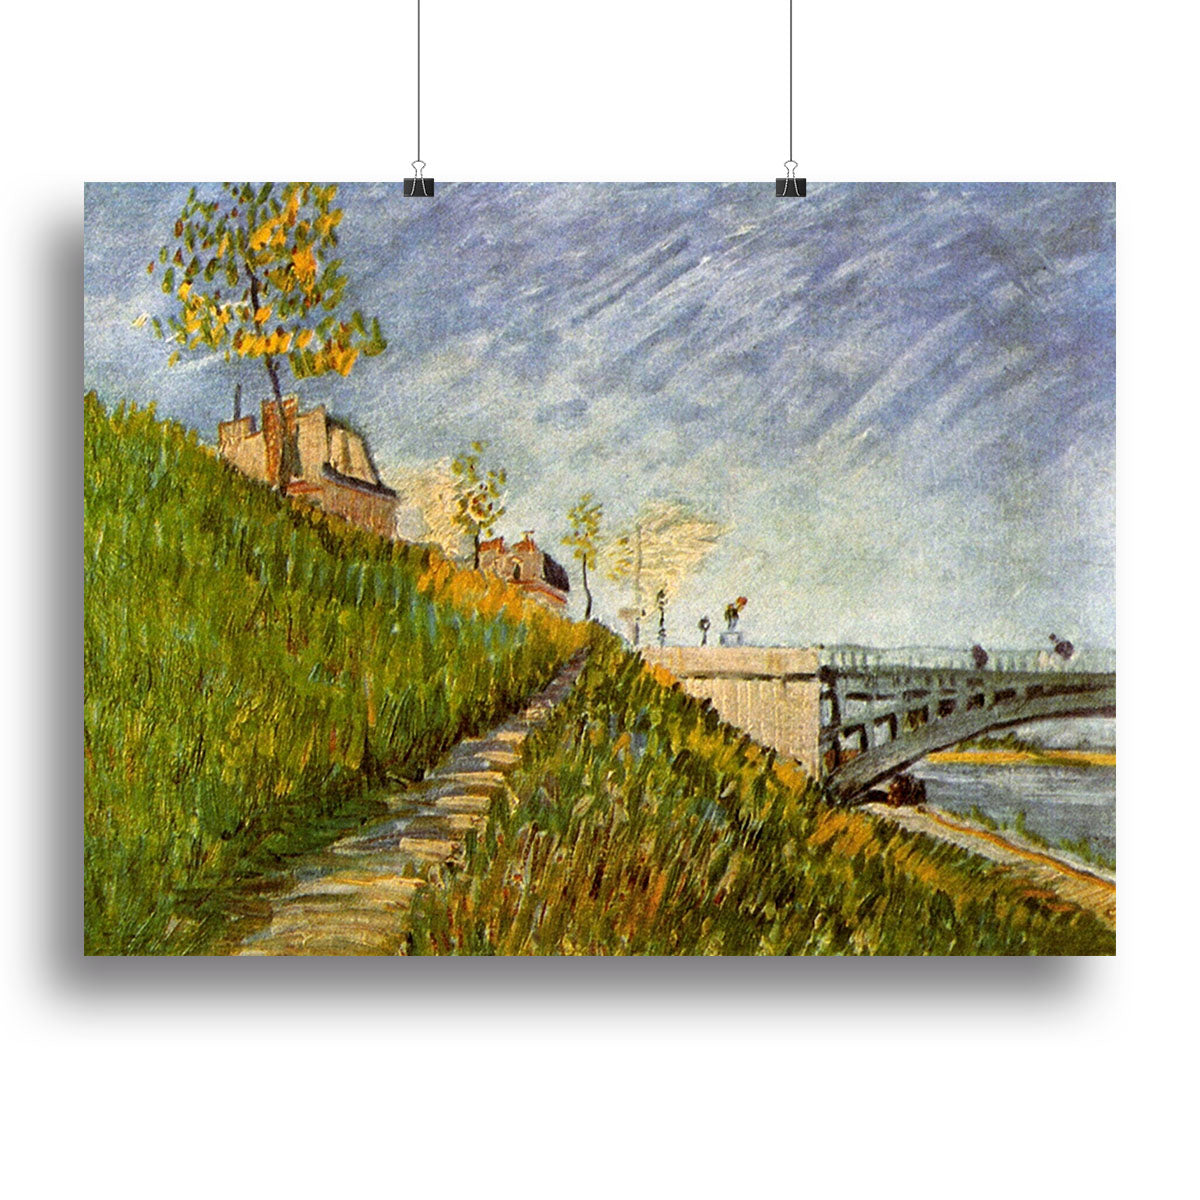 Banks of the Seine with Pont de Clichy by Van Gogh Canvas Print or Poster - Canvas Art Rocks - 2